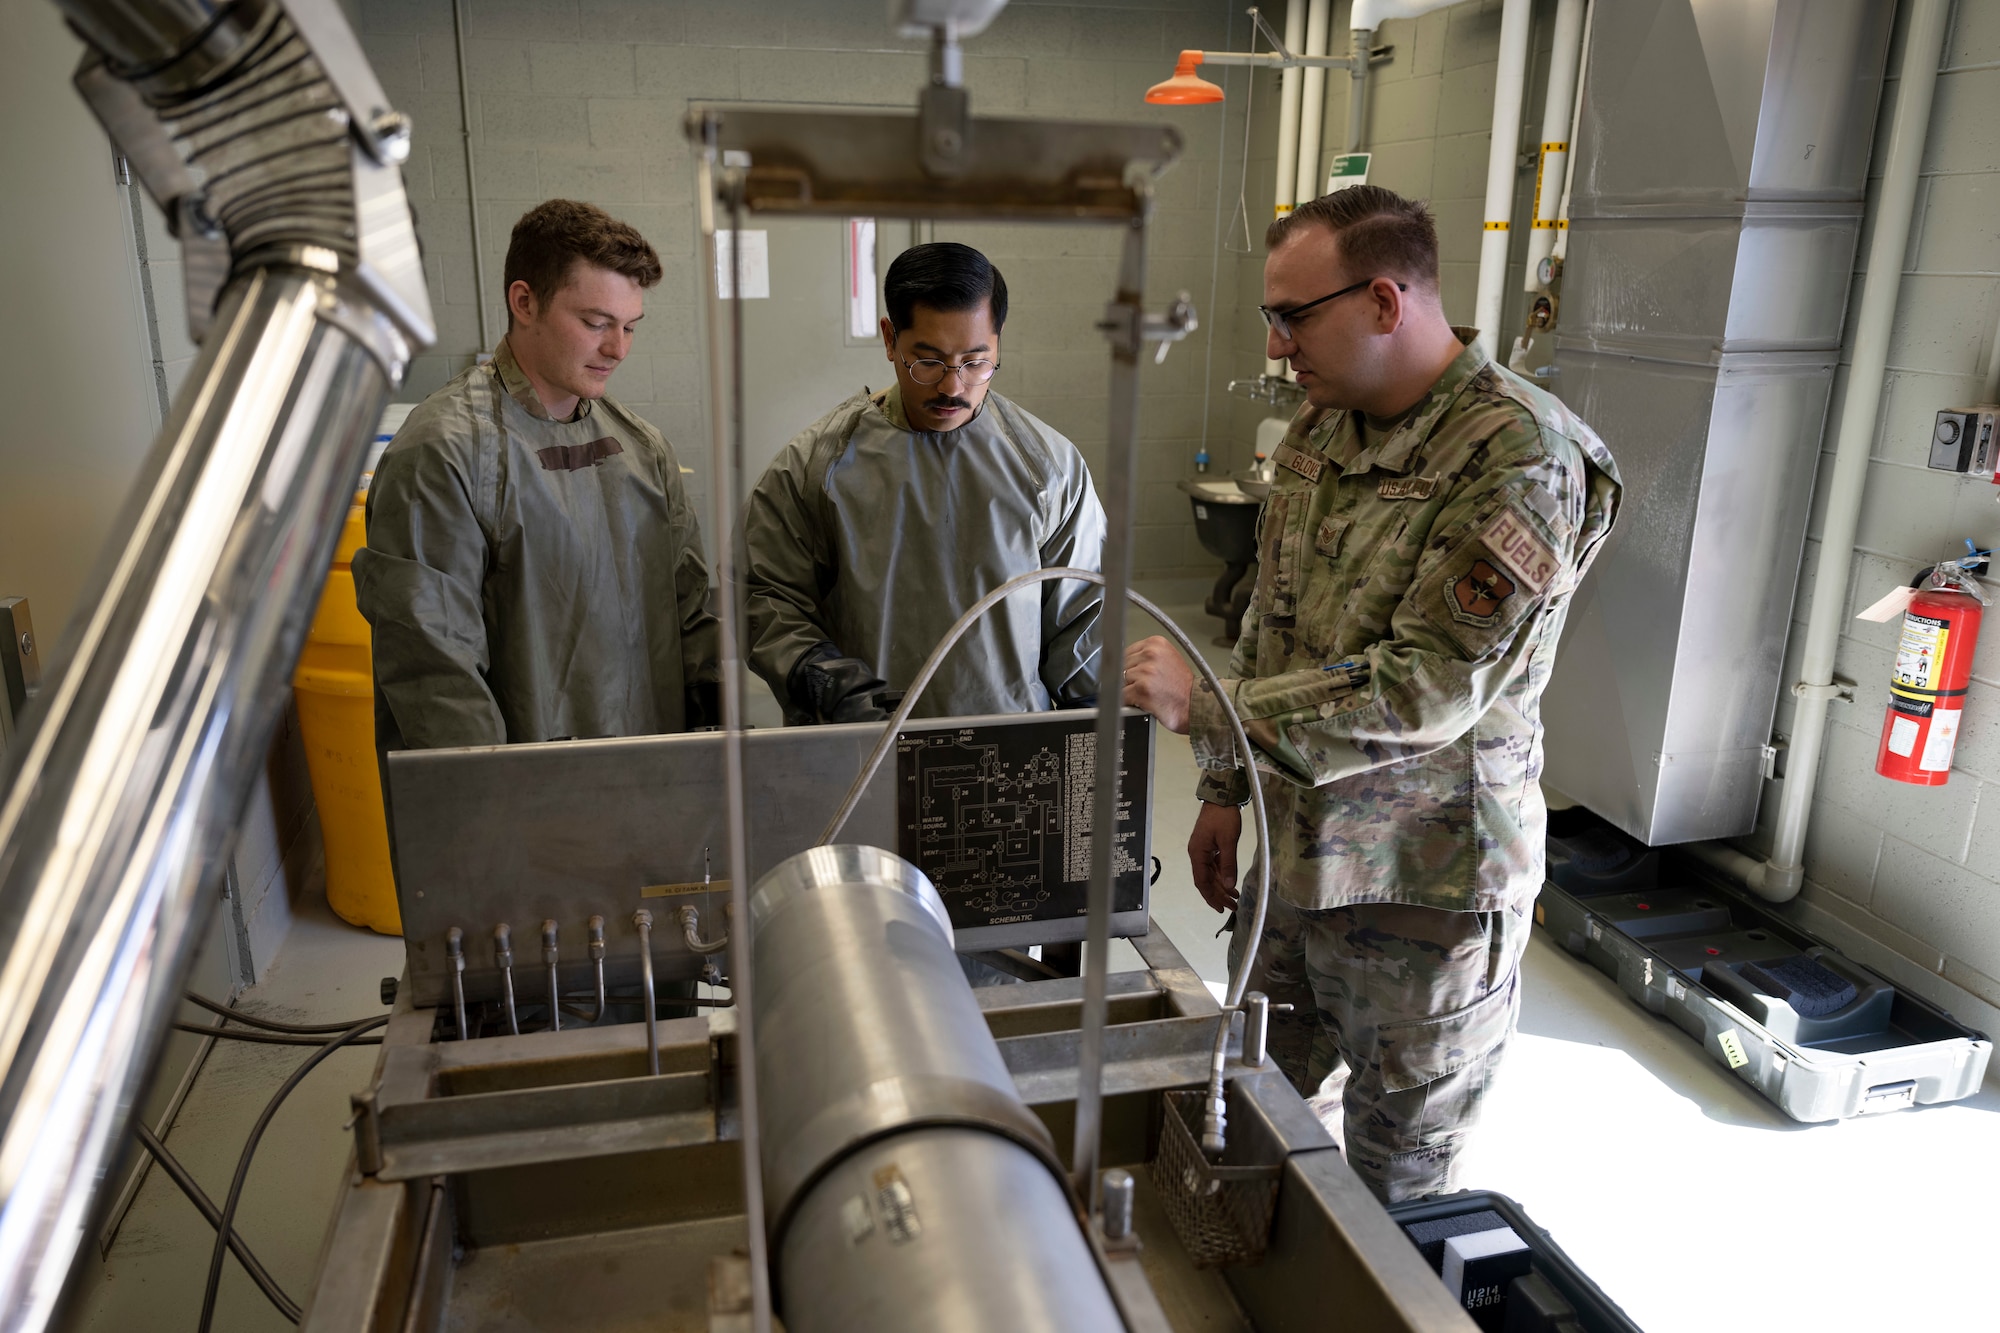 U.S. Air Force Airman 1st Class Cameron Kelley, 49th Component Maintenance Squadron aircraft fuel systems journeyman, left, U.S. Air Force Staff Sgt. Brandon Millare, middle, and U.S. Air Force Staff Sgt. Christopher Glover, 49th CMS aircraft fuel systems craftsman, discuss transportation and handling of hydrazine at Holloman Air Force Base, New Mexico, April 18, 2023.  Hydrazine plants require careful planning and engineering to ensure the safety of workers and the surrounding environment. (U.S. Air Force photo by Airman 1st Class Michelle Ferrari)